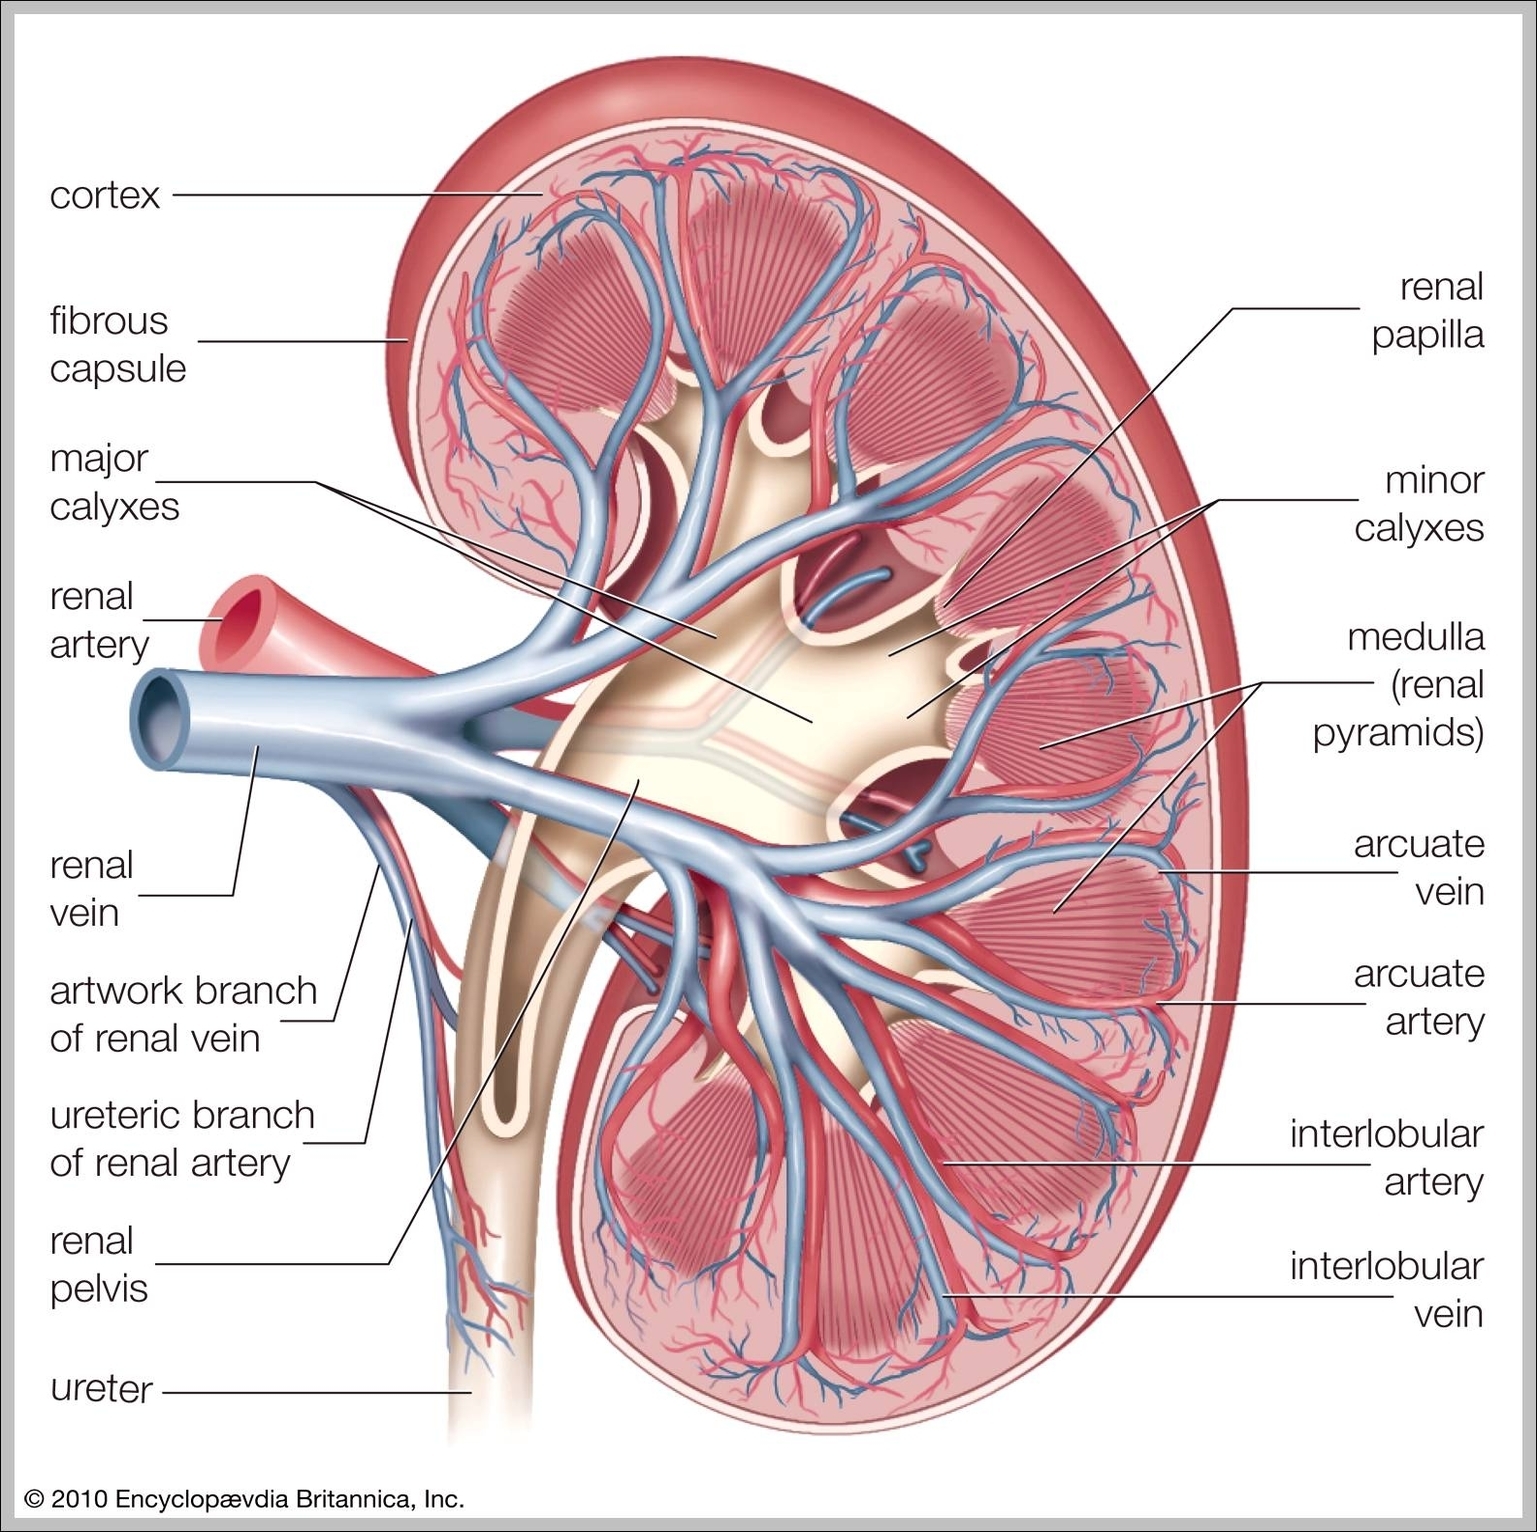 where is the kidney located in the human body